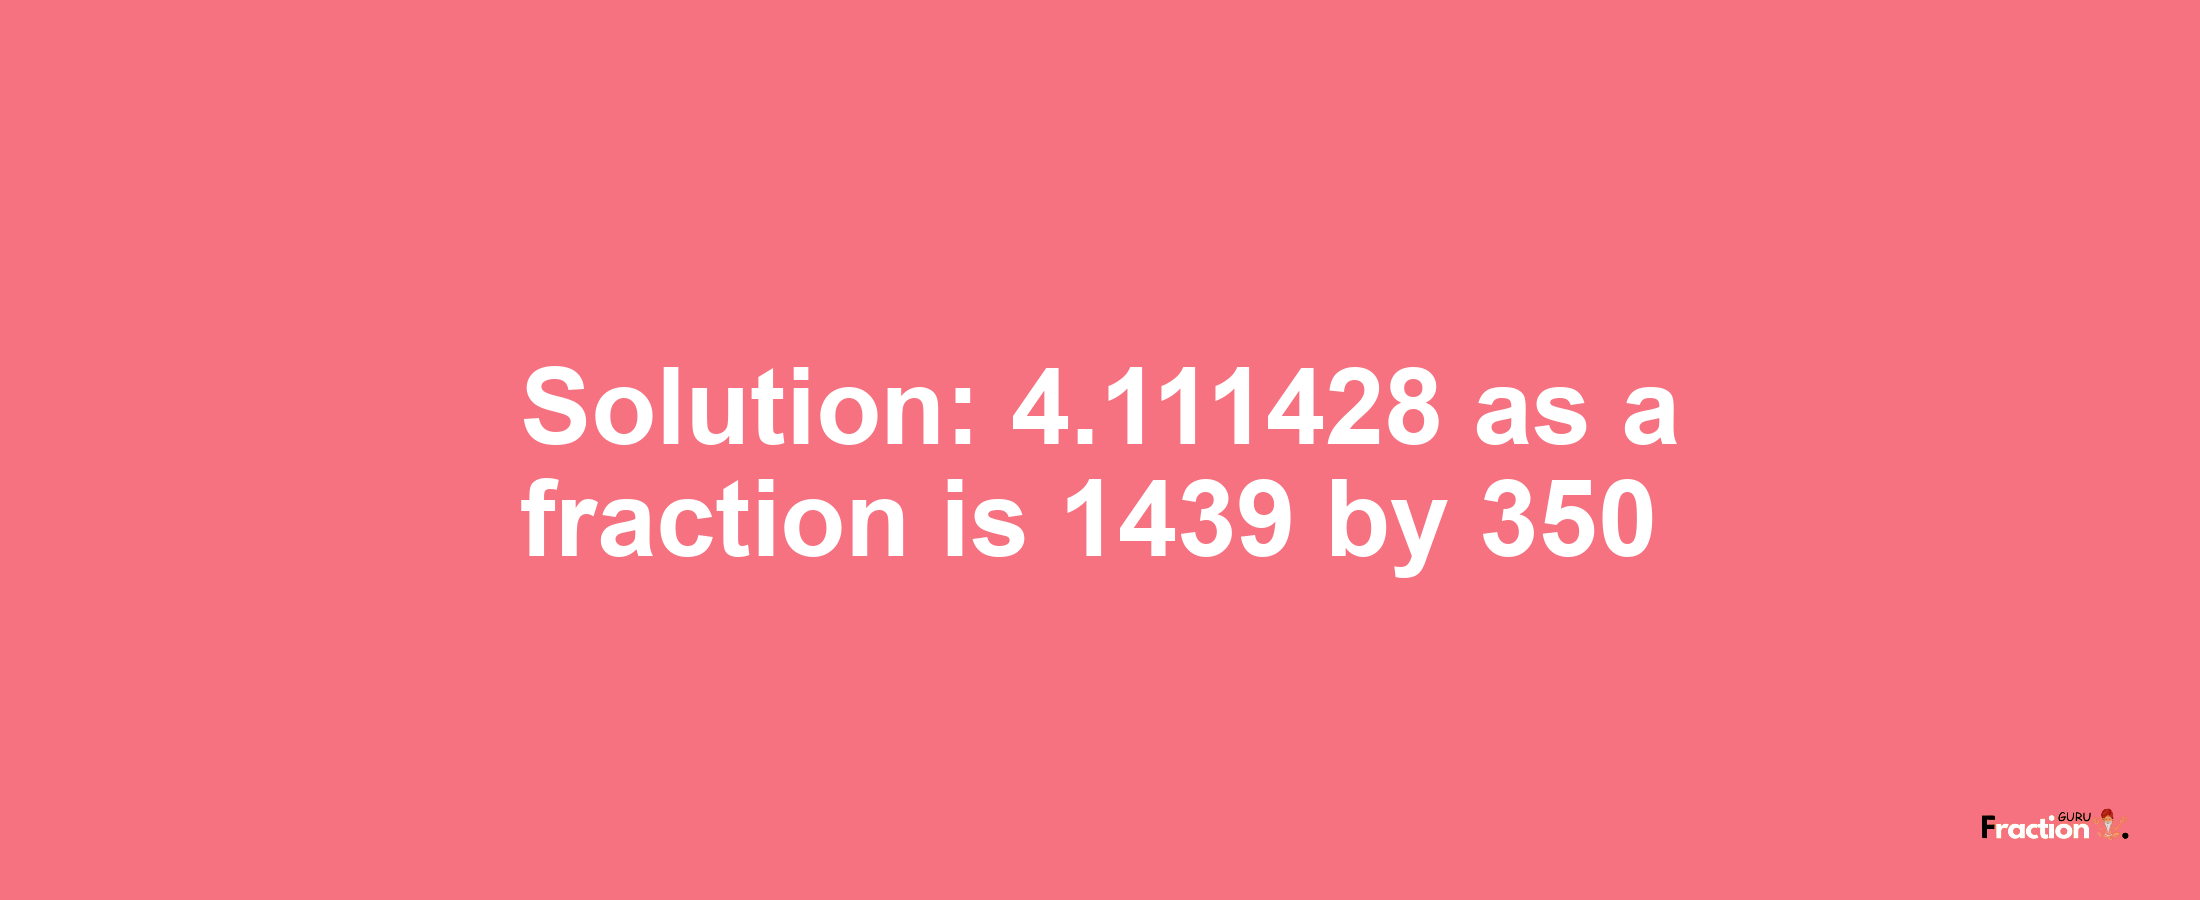 Solution:4.111428 as a fraction is 1439/350